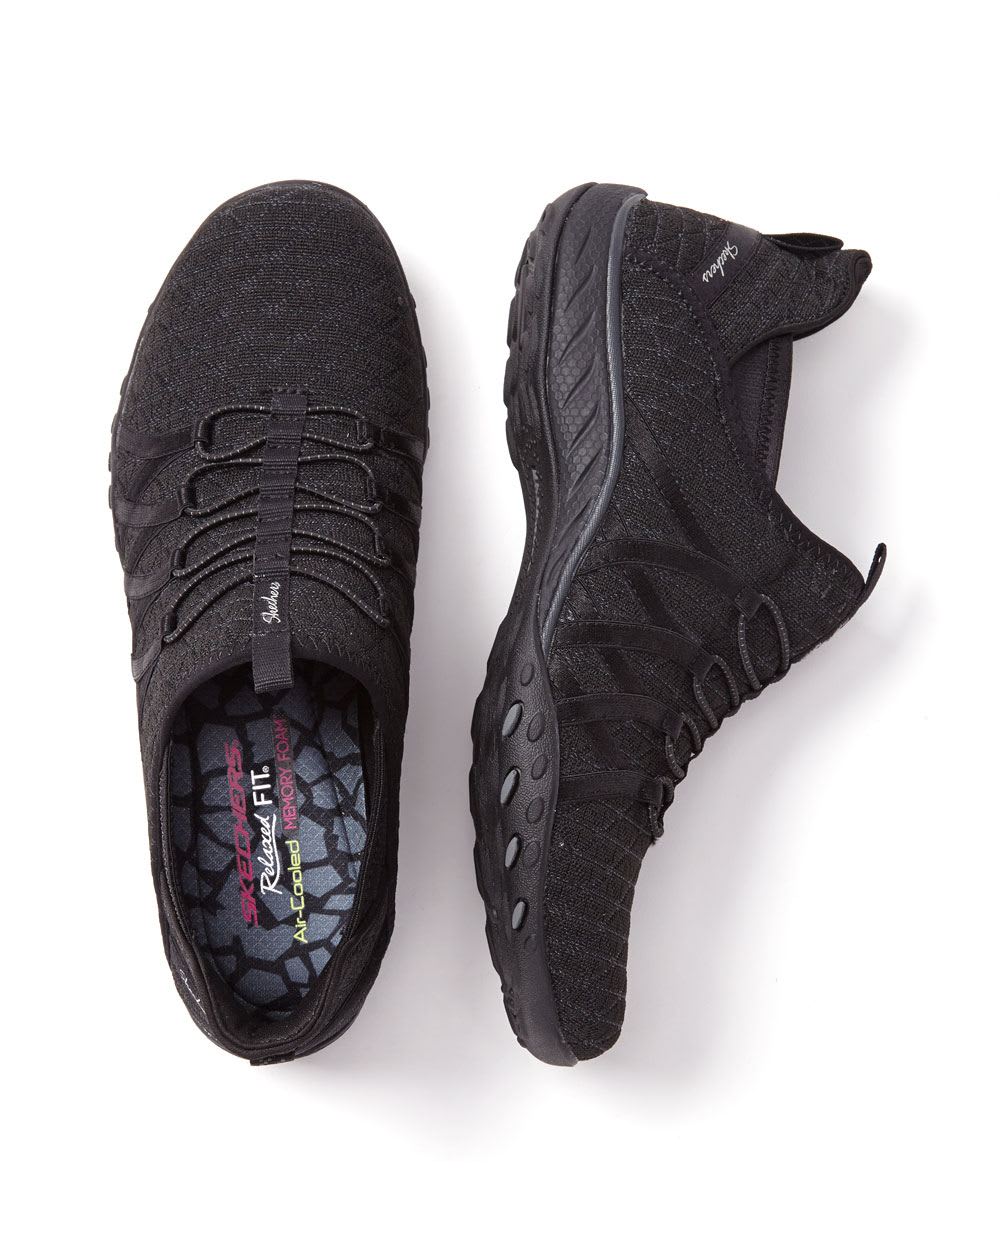 skechers wide fit with air cooled memory foam